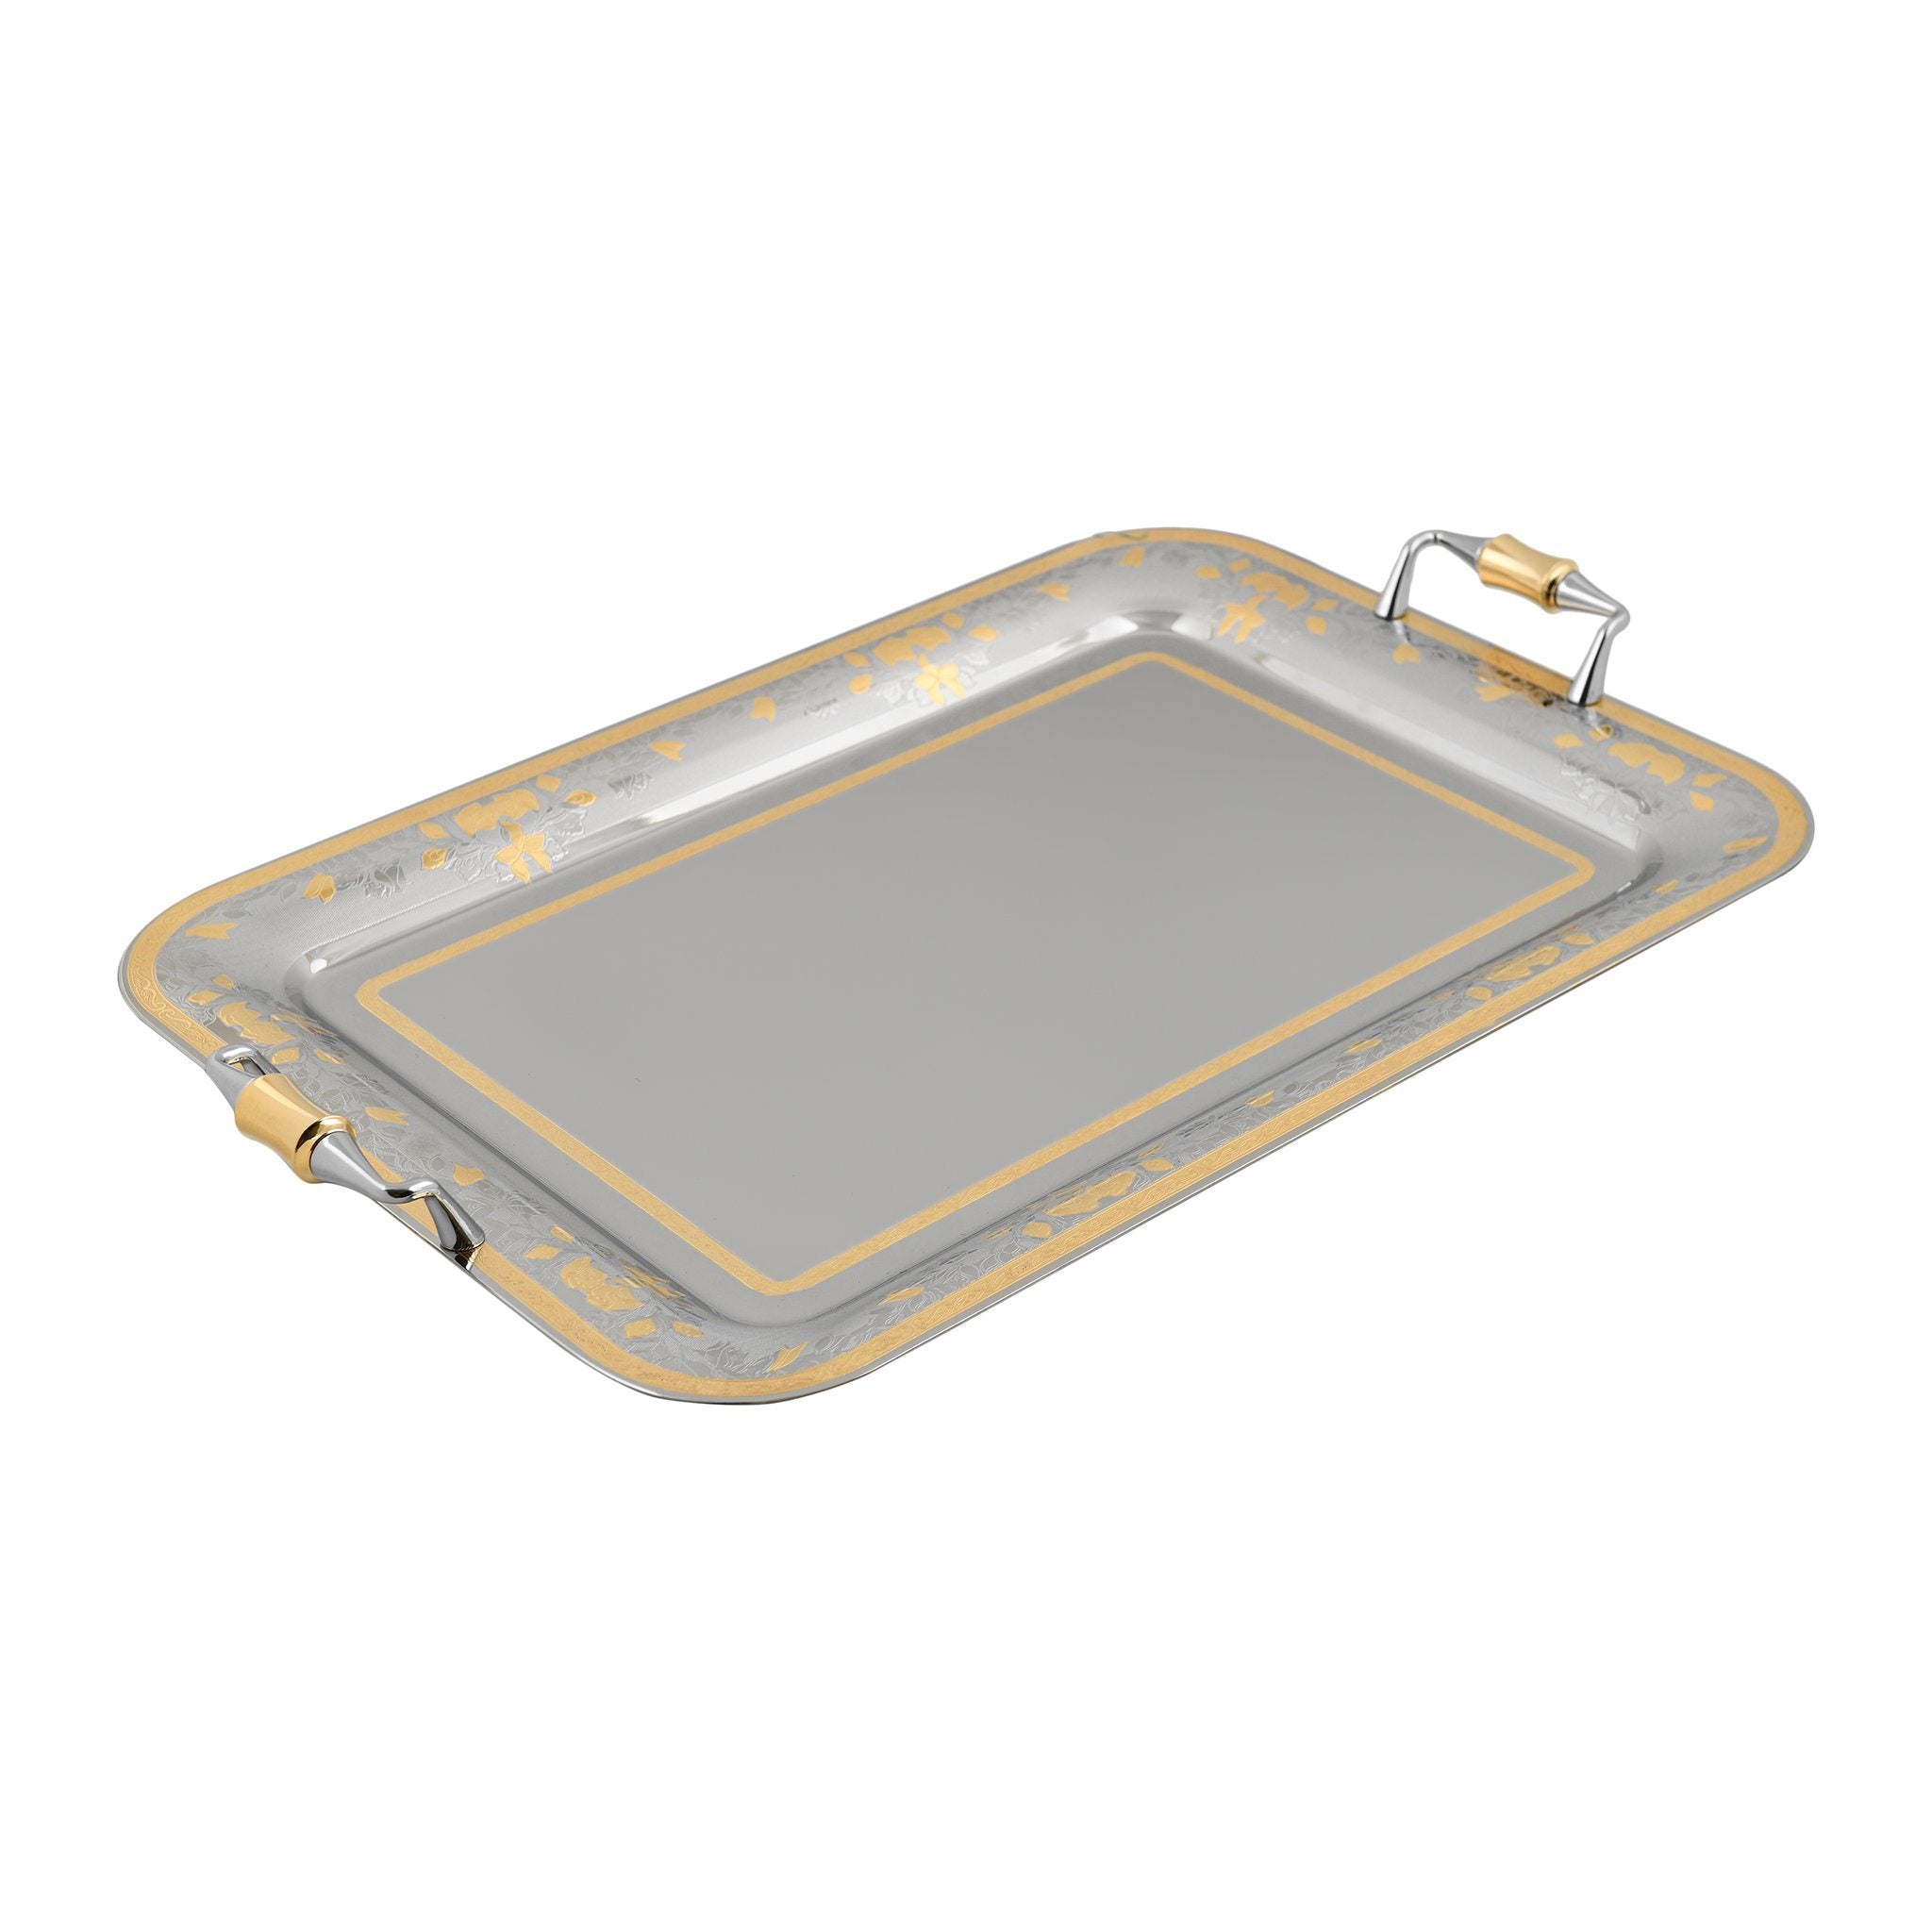 Elegant Gioiel - Rectangular Tray with Handles - Gold - Stainless Steel 18/10 - 50x36cm - 75000179